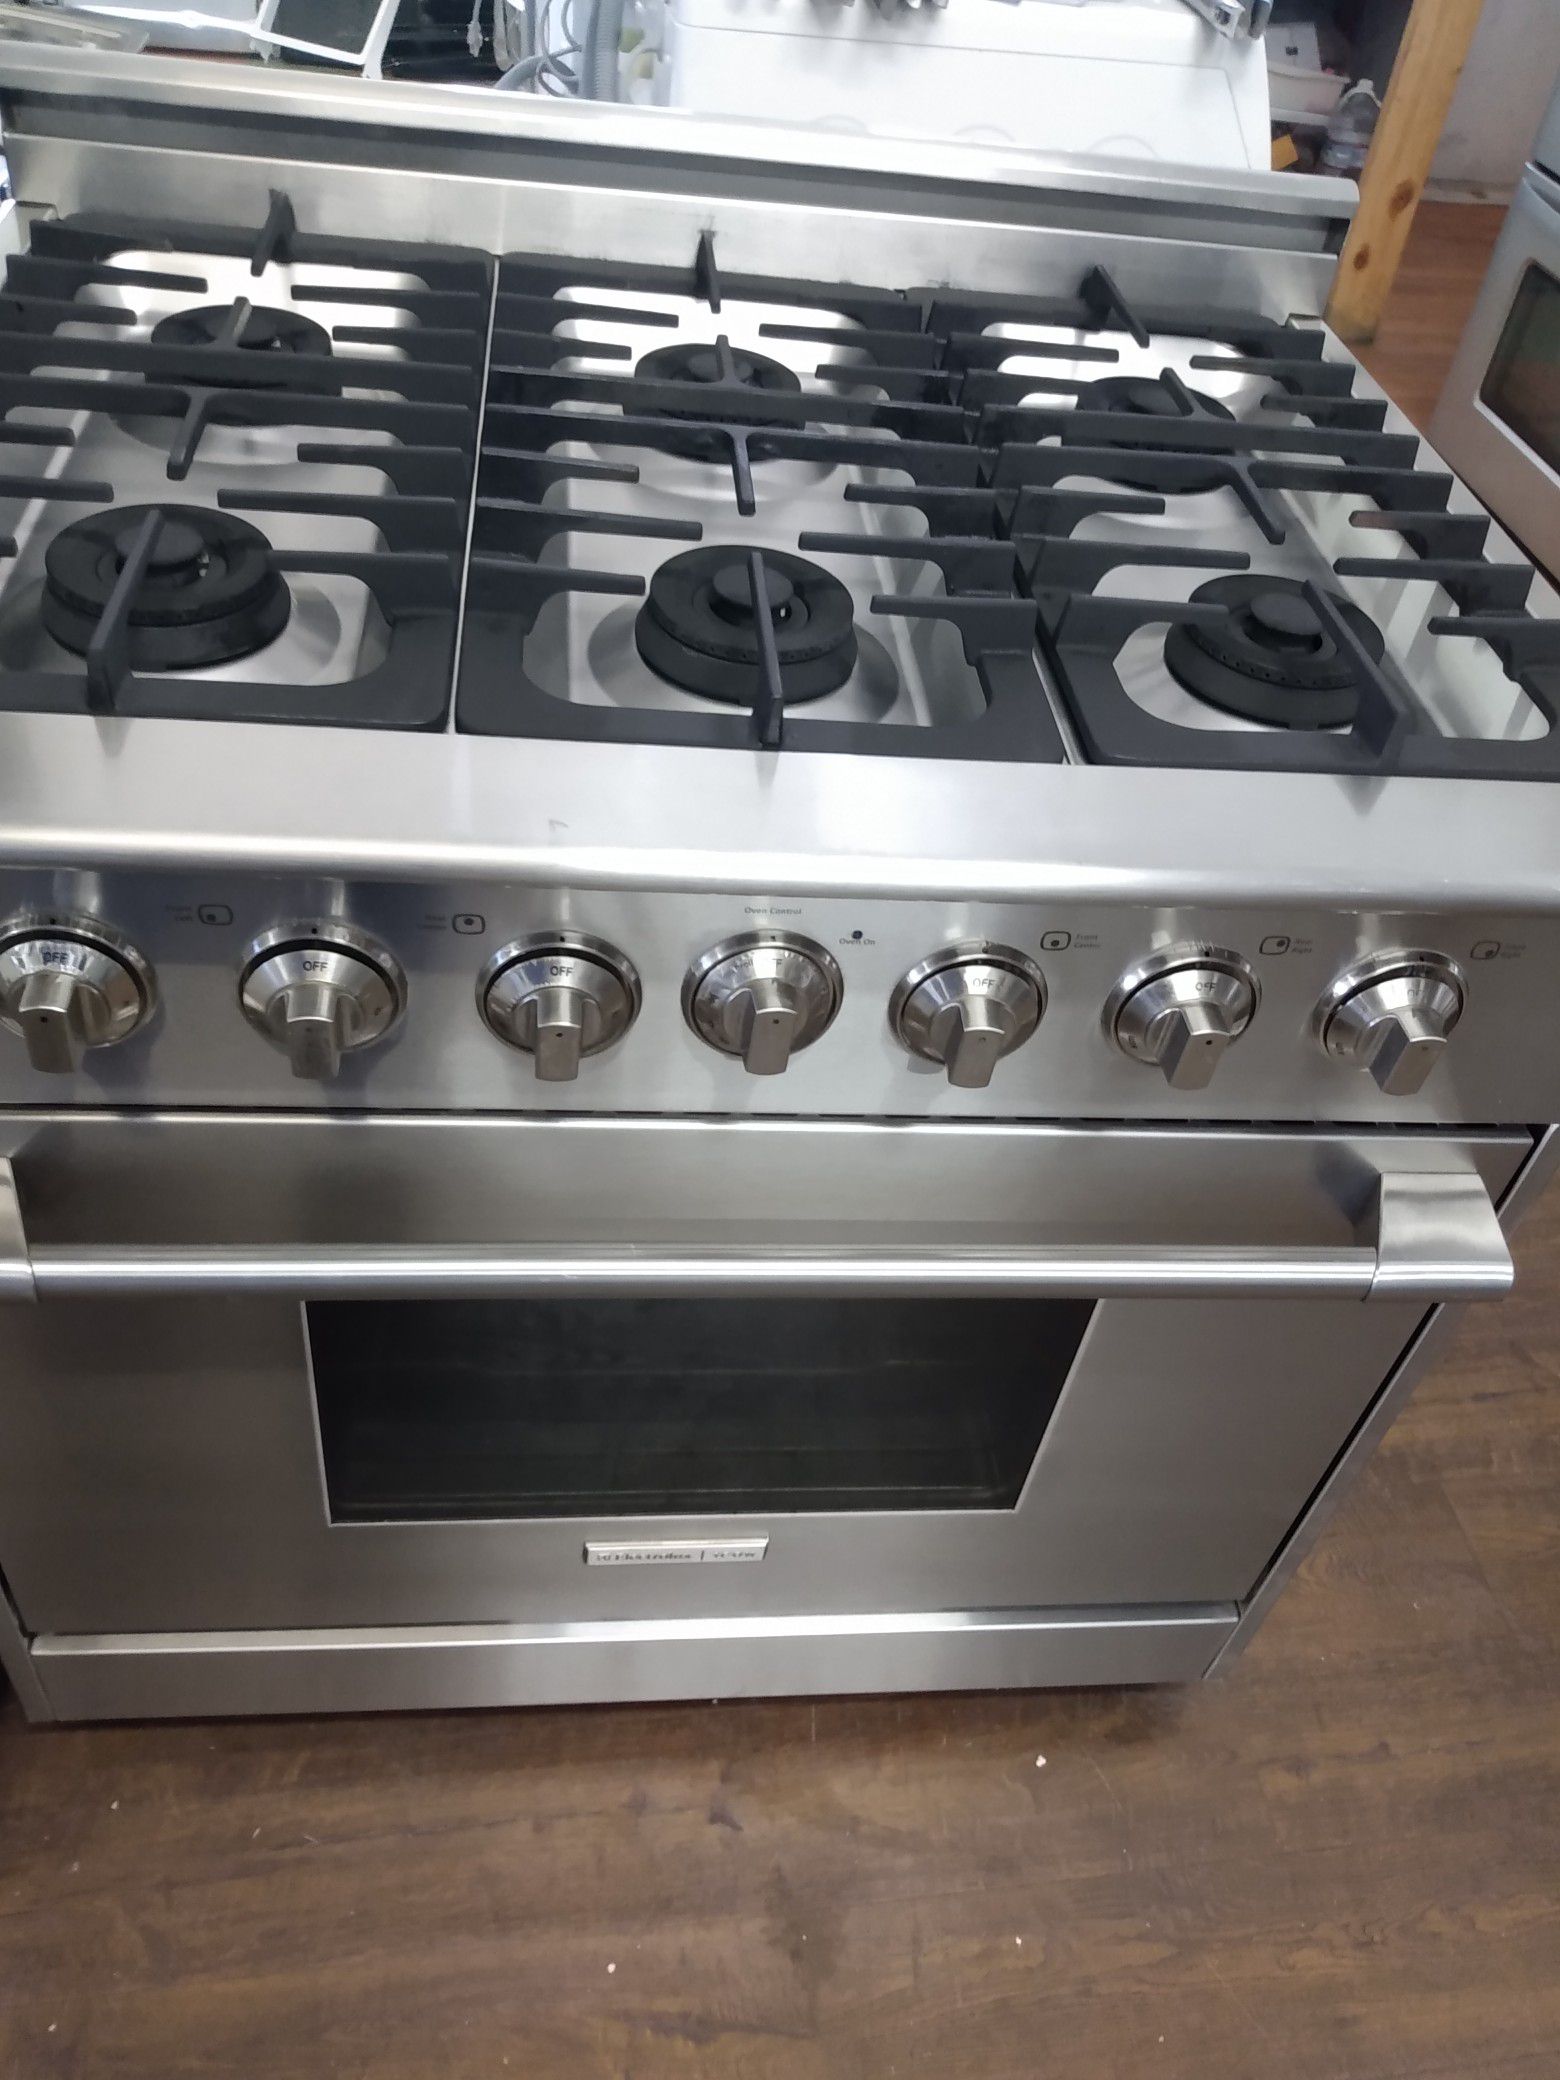 ELECTROLUX GAS STOVE STAINLESS STEEL 6 BURNERS 36"W